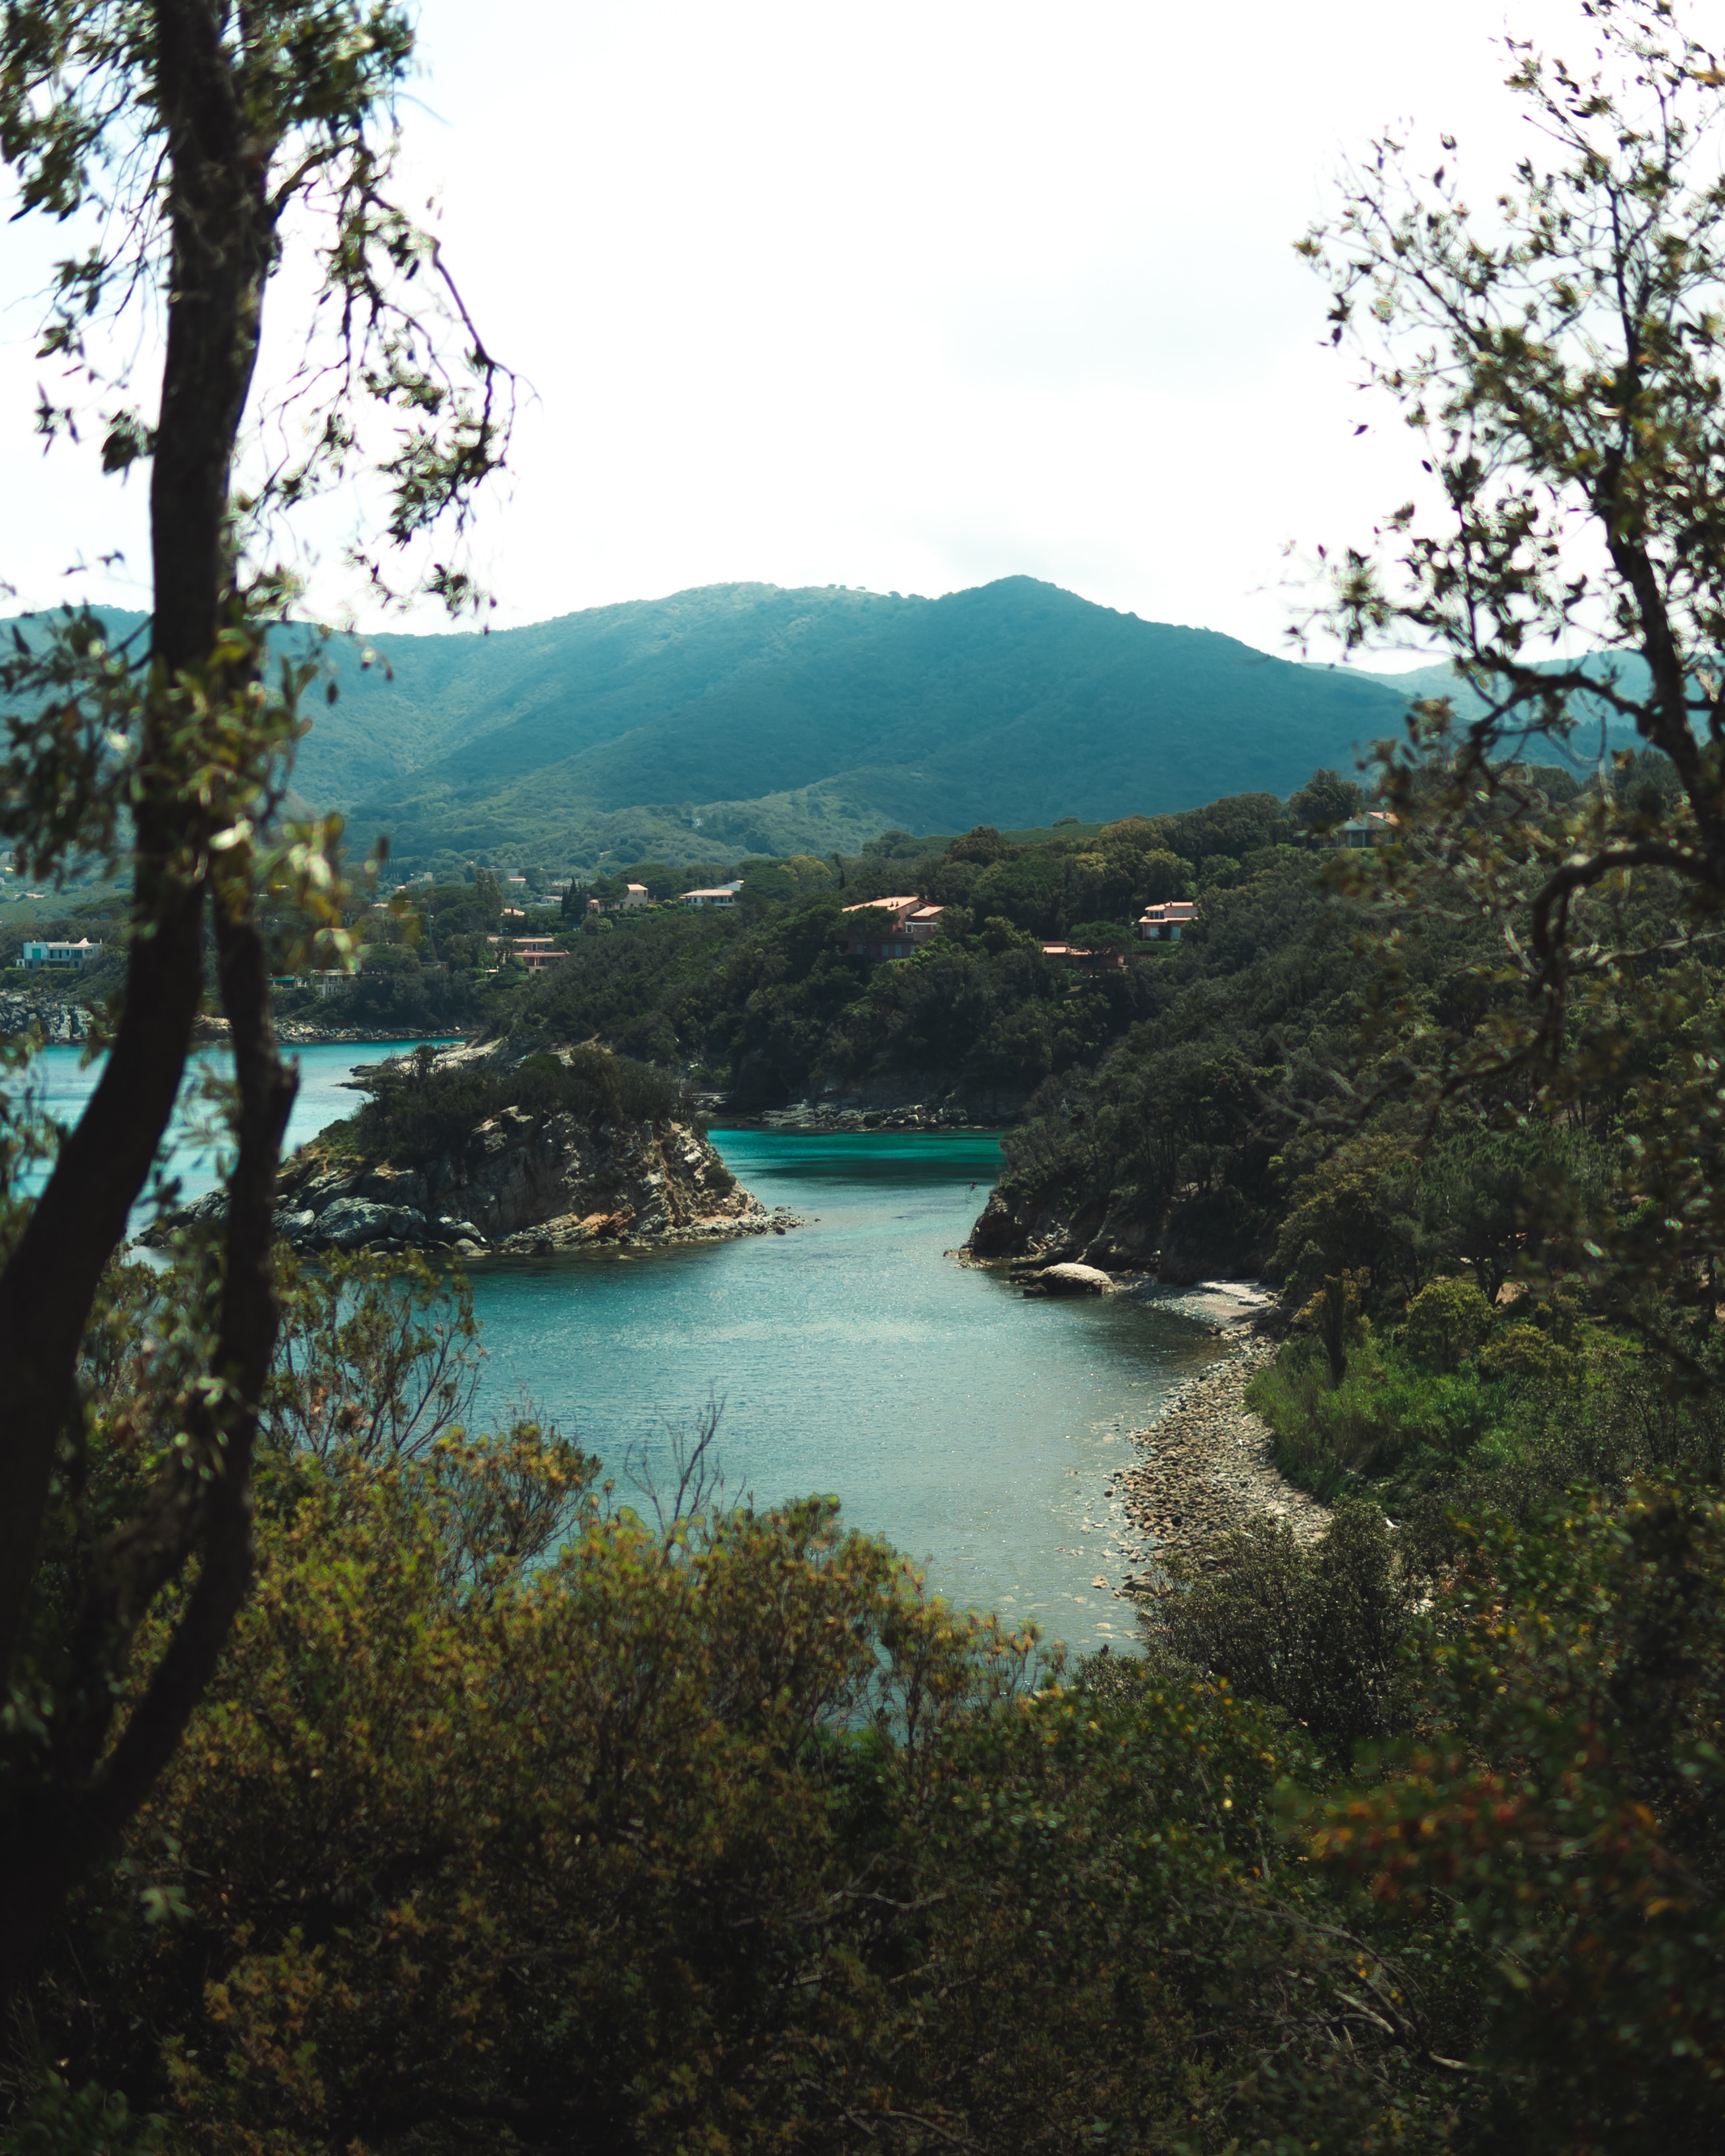 The Island of Elba as you've never seen it before